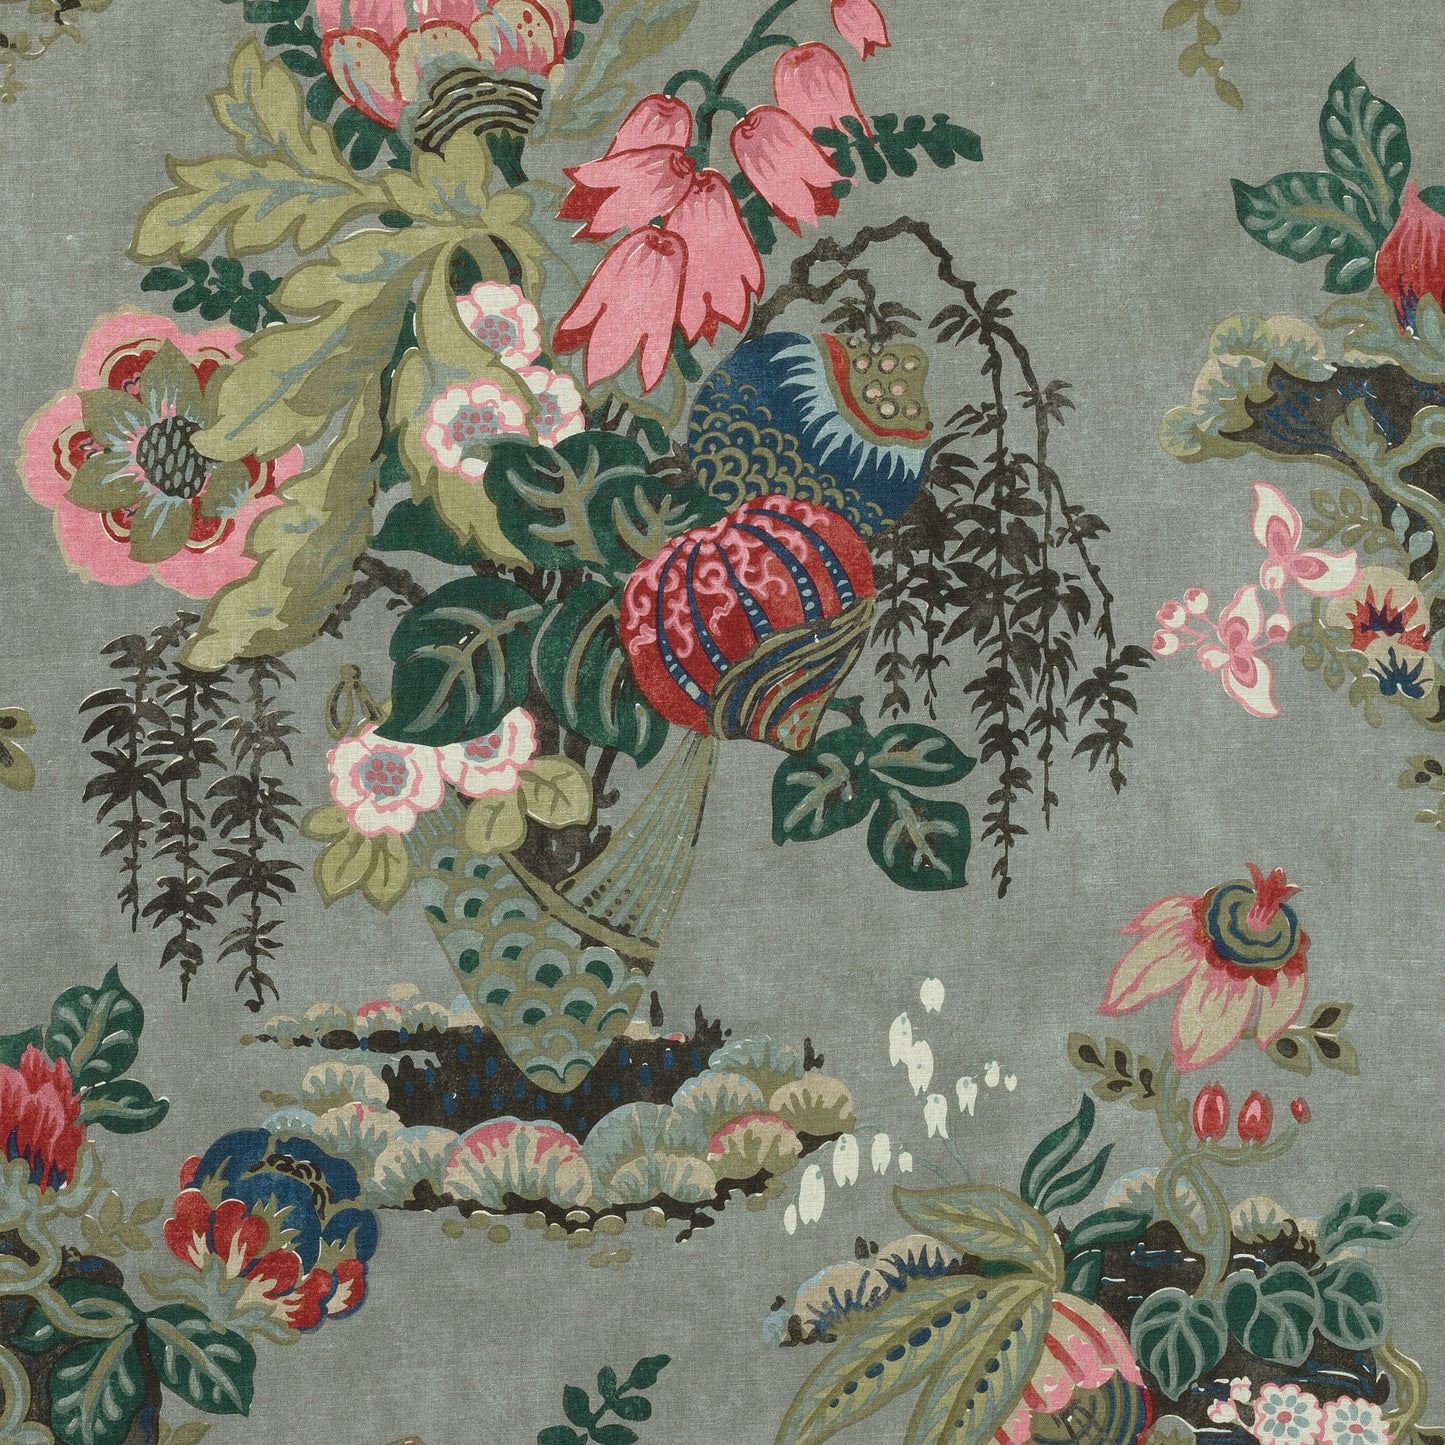 Purchase  Ann French Fabric Item# AF9643  pattern name  Fairbanks